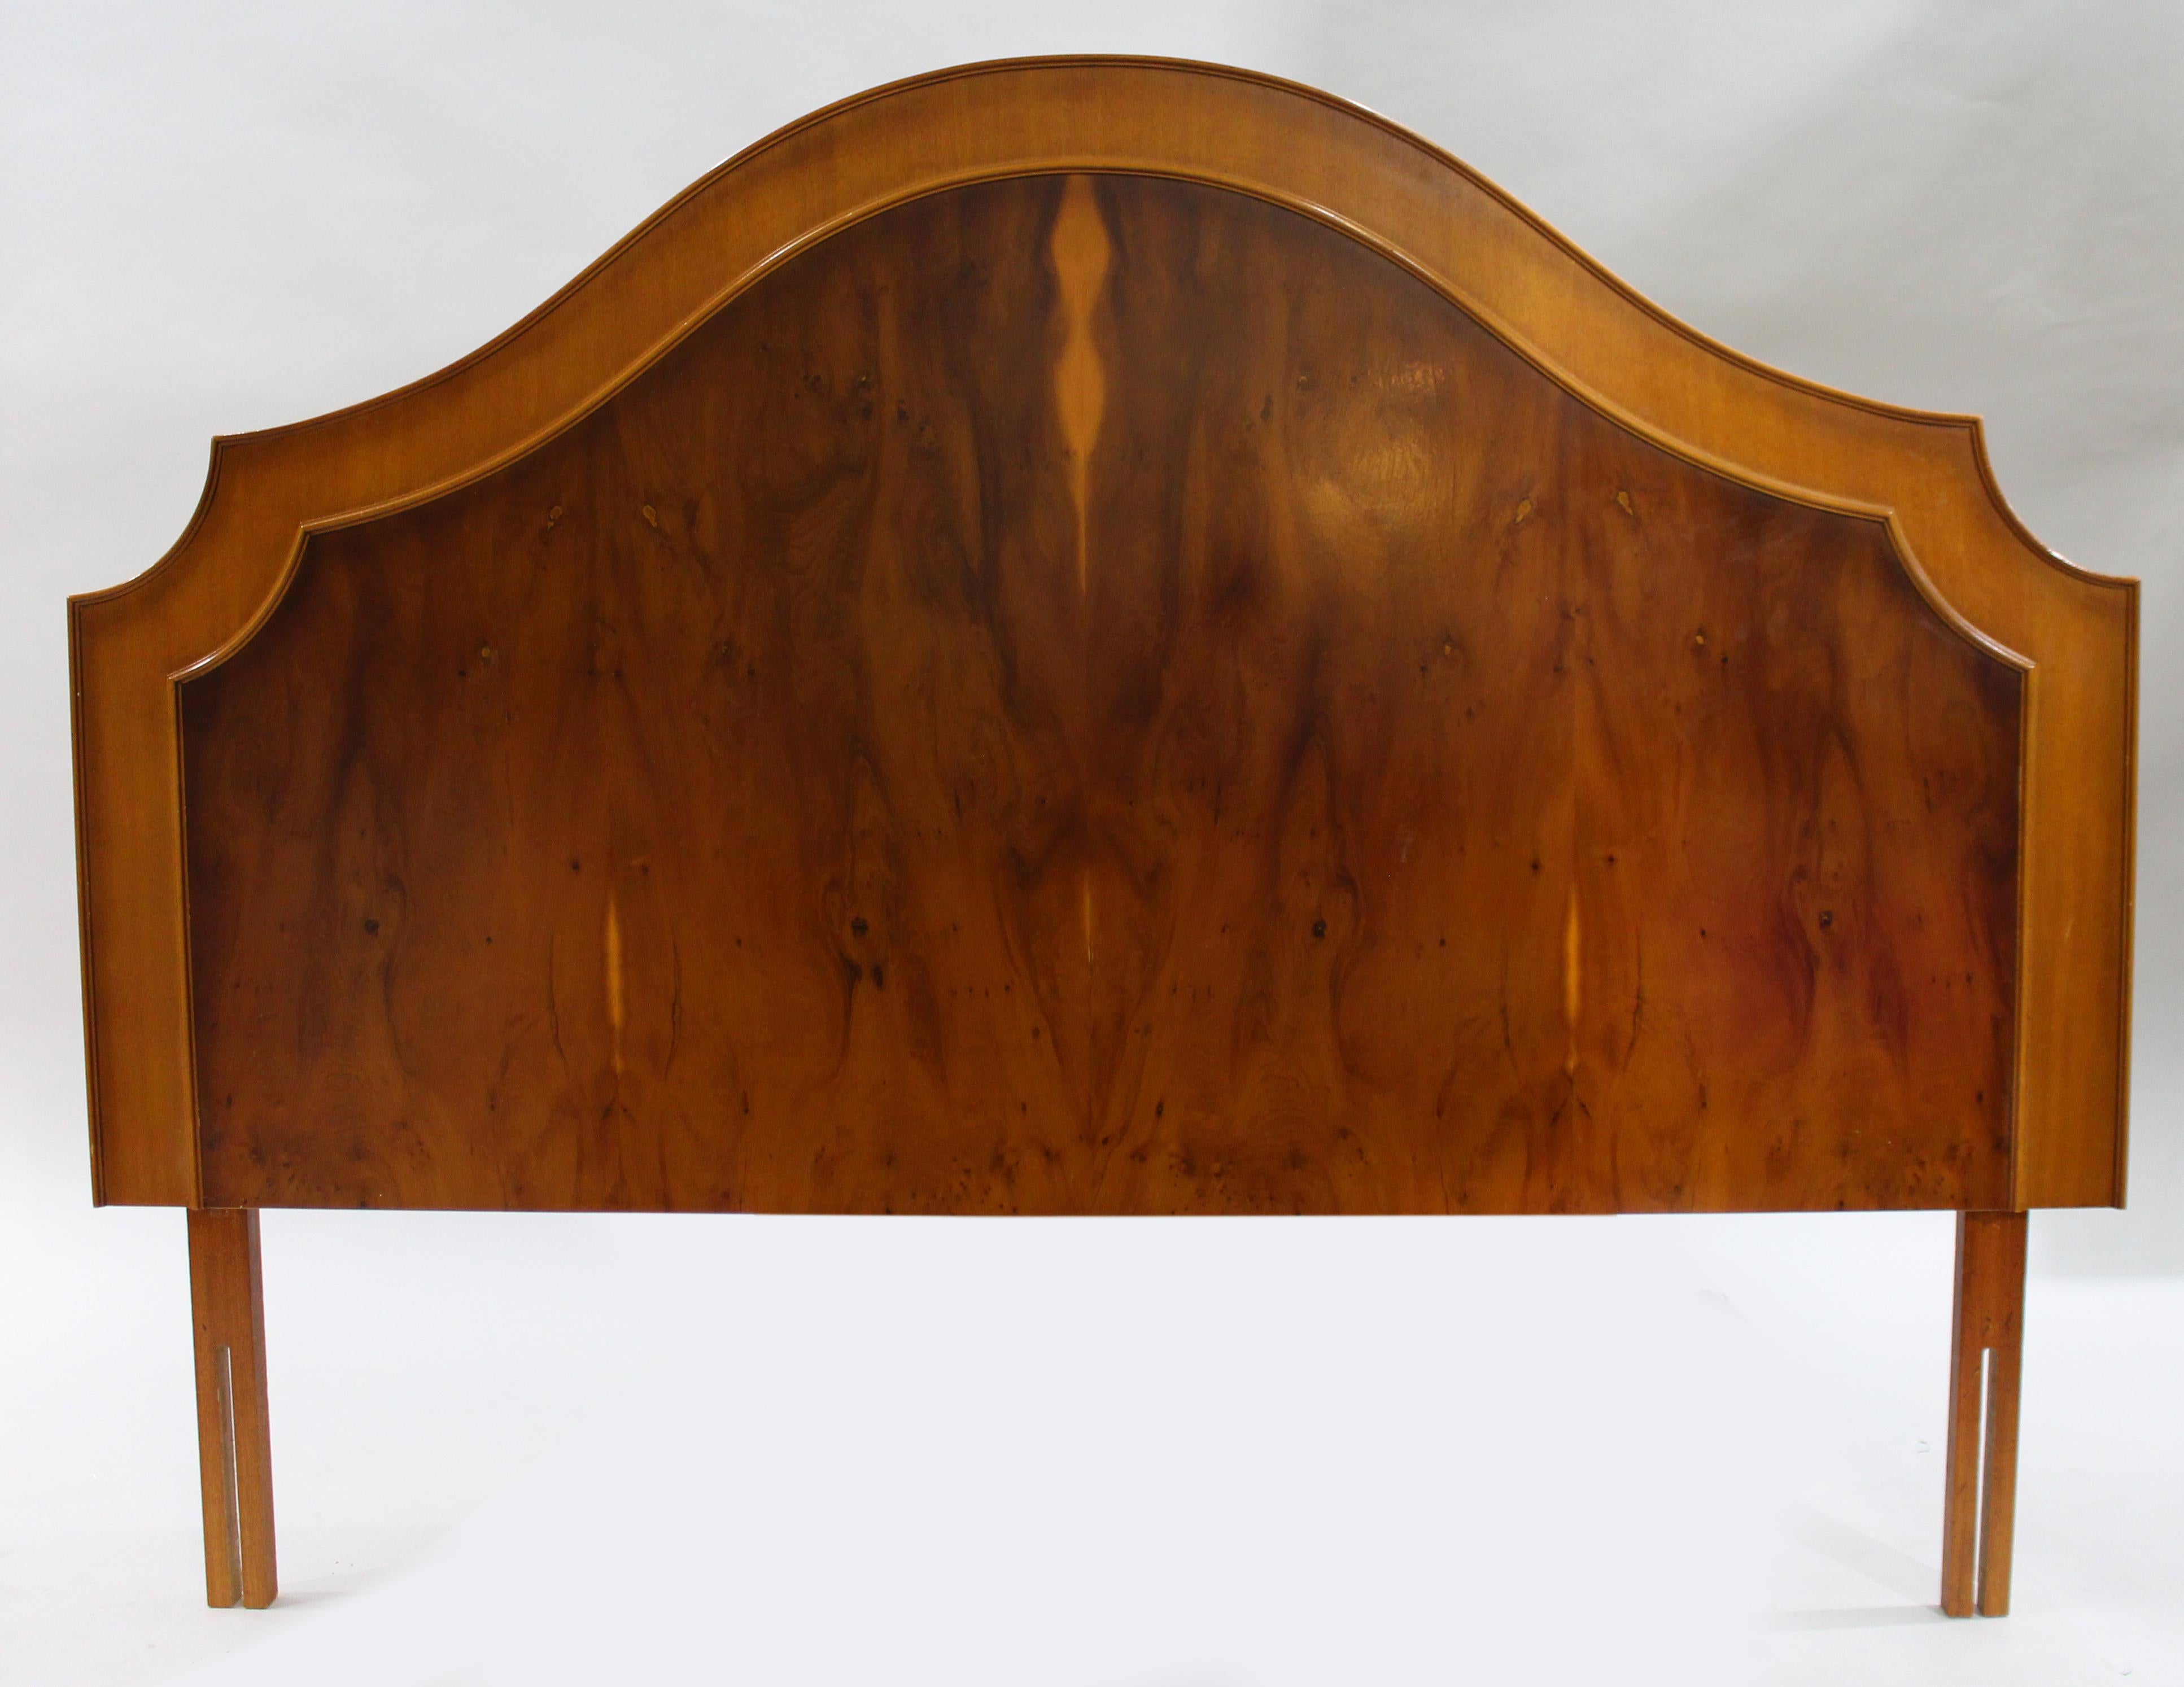 Vintage 4ft bed yew wood headboard


Measures: Width: 138 cm

Height: 105 cm

Vintage, late twentieth century, made by Bradley

Yew wood headboard for 4ft bed

Offered in good condition, little wear only in align with age. Struts changed